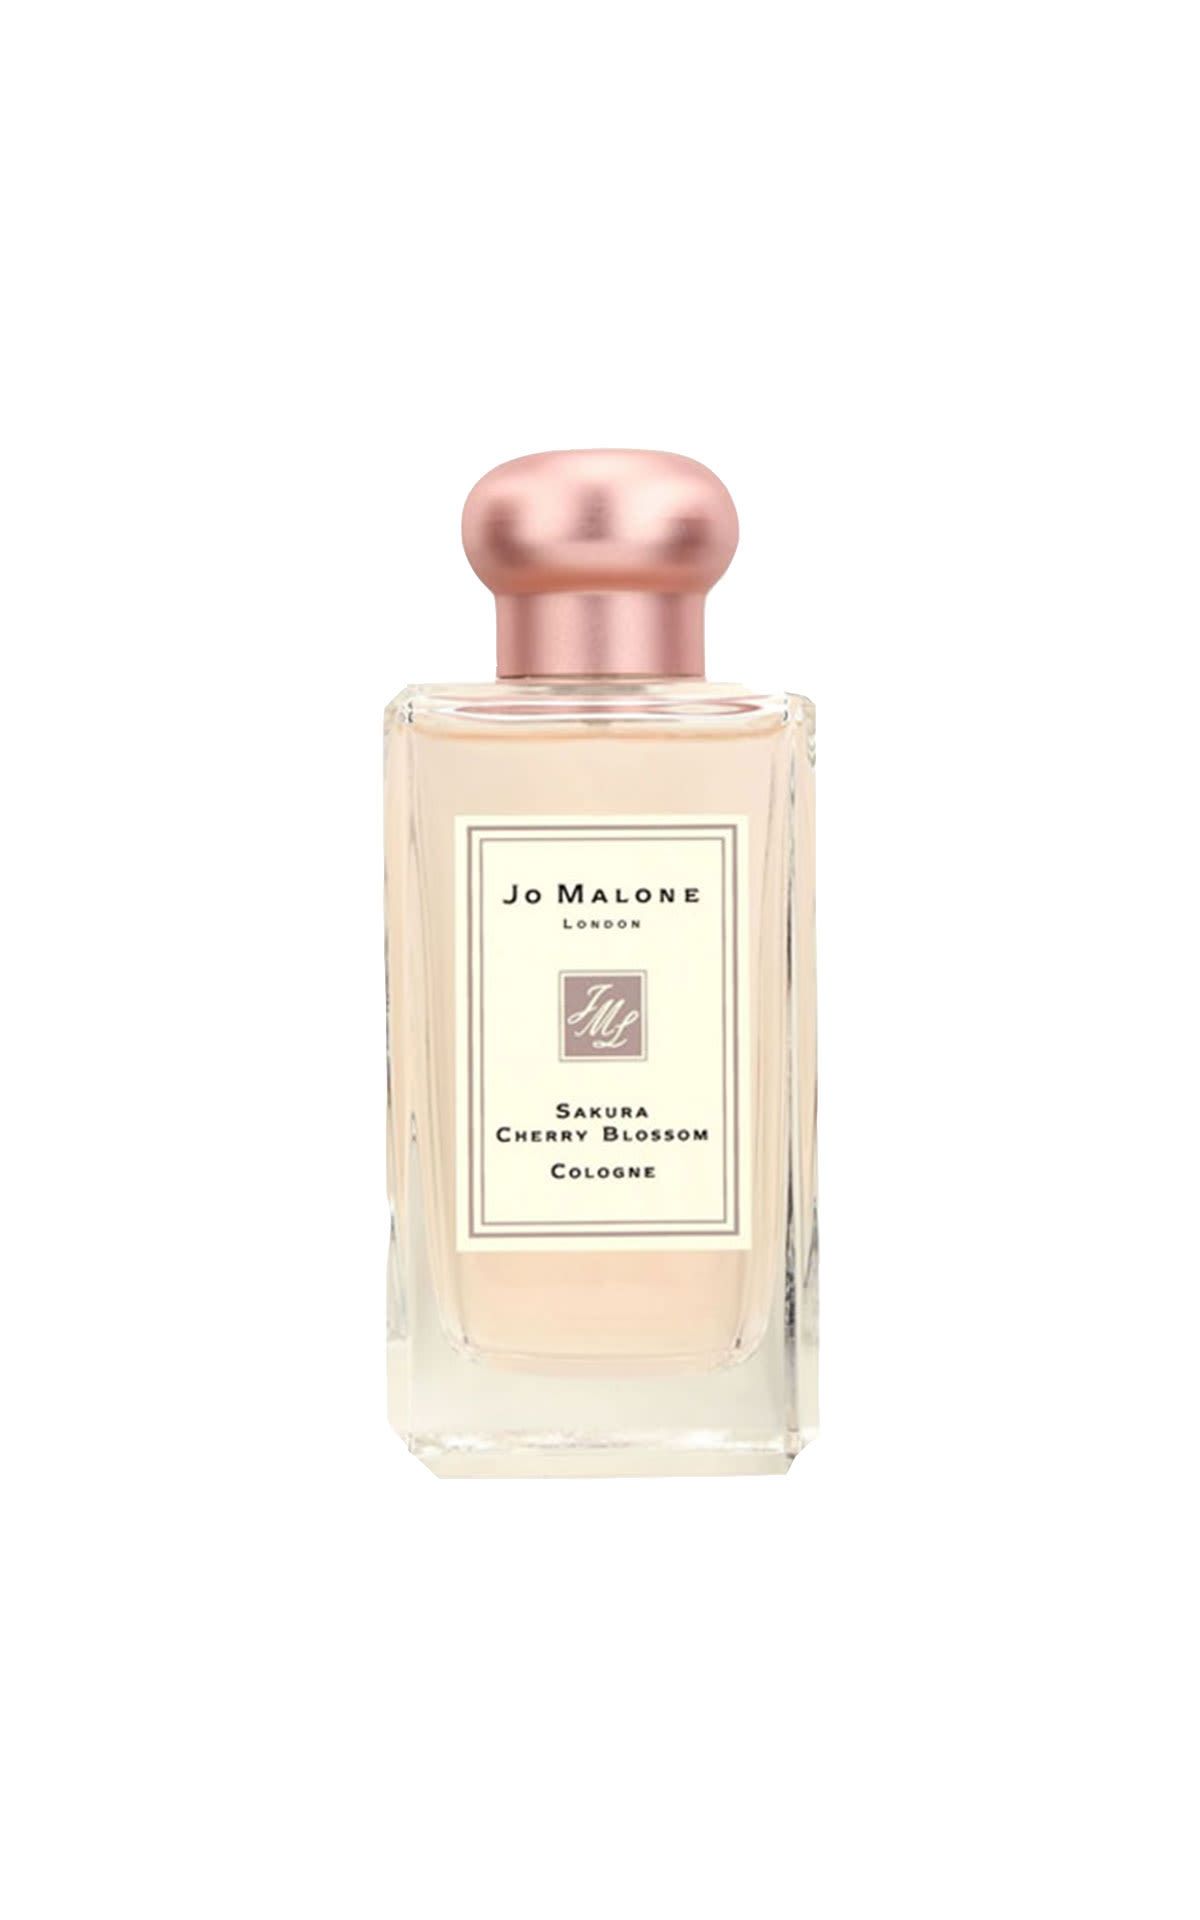 The Cosmetics Company Store Sakura cherry blossom cologne from Bicester Village